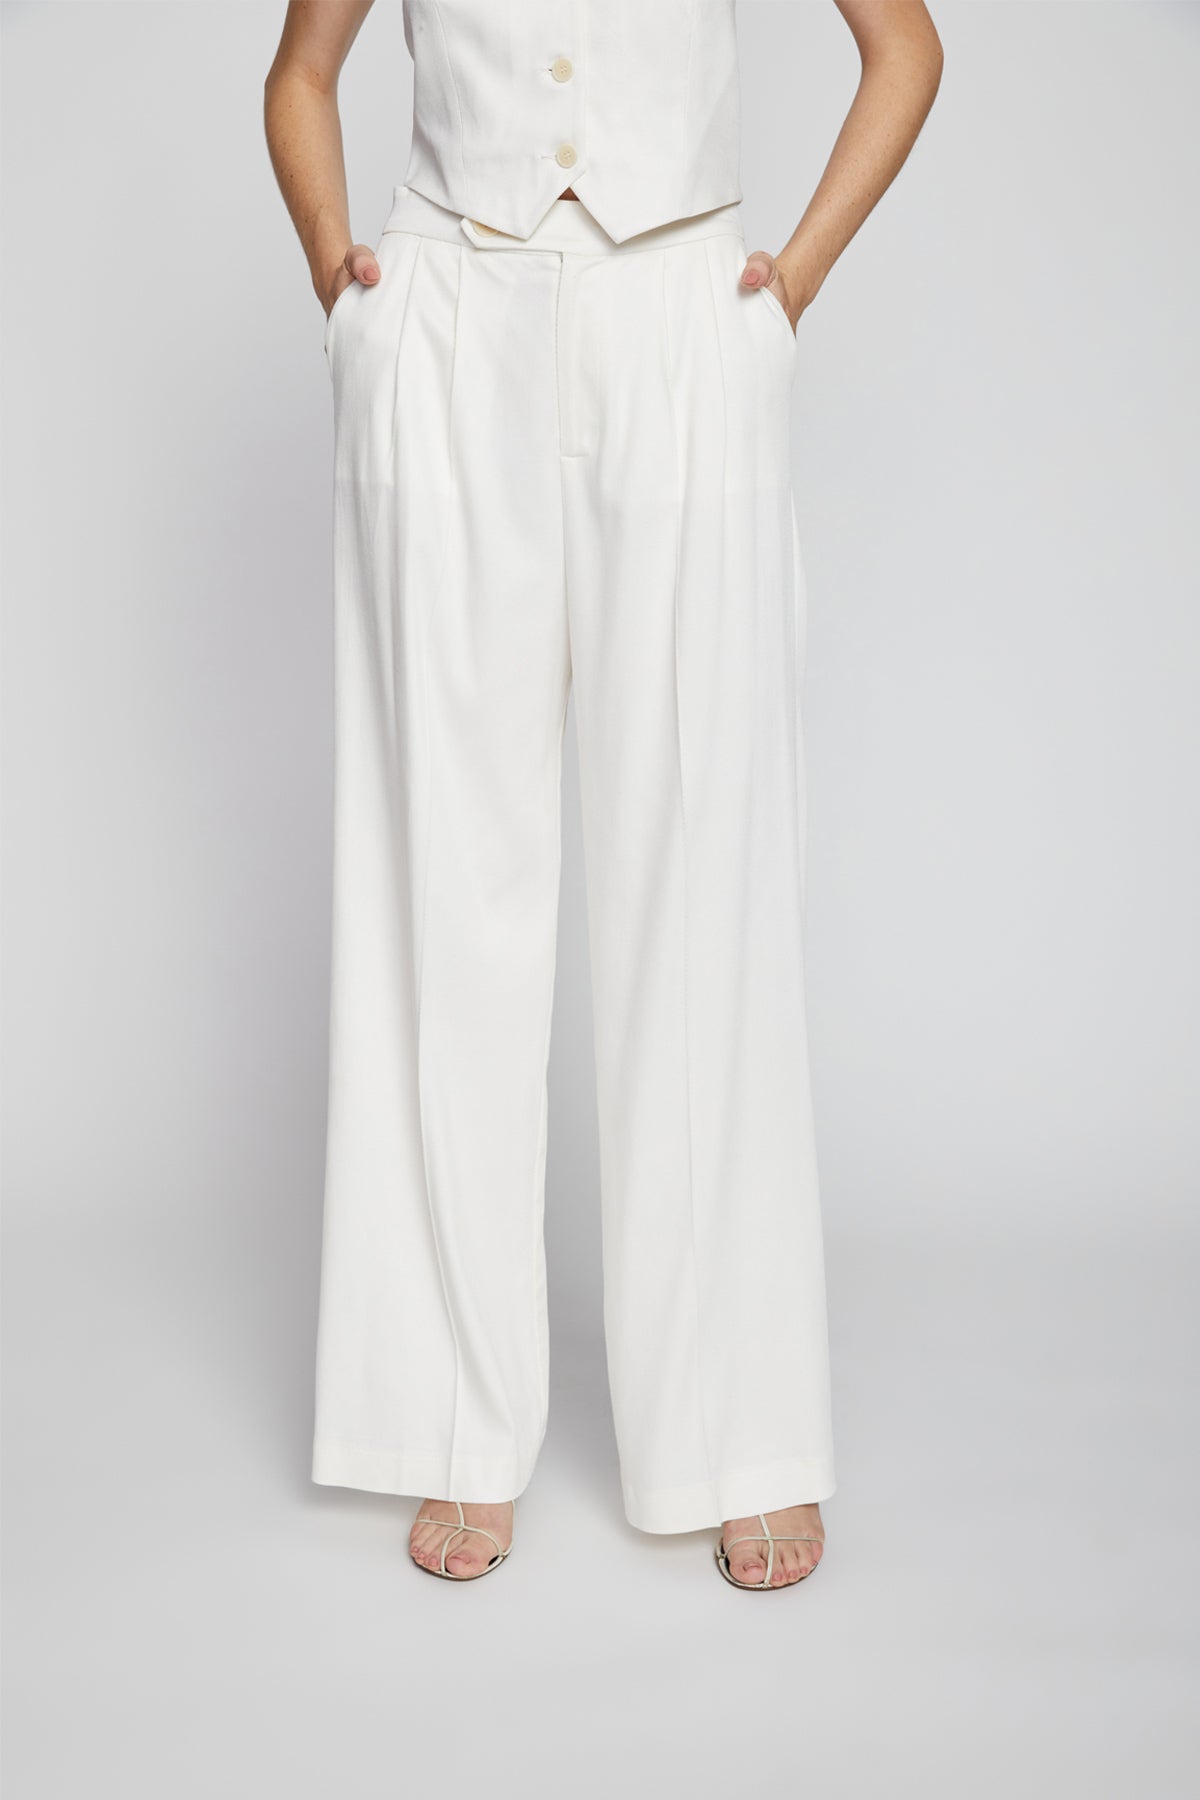 Bailey 44 Cleo Twill Pants in Creme